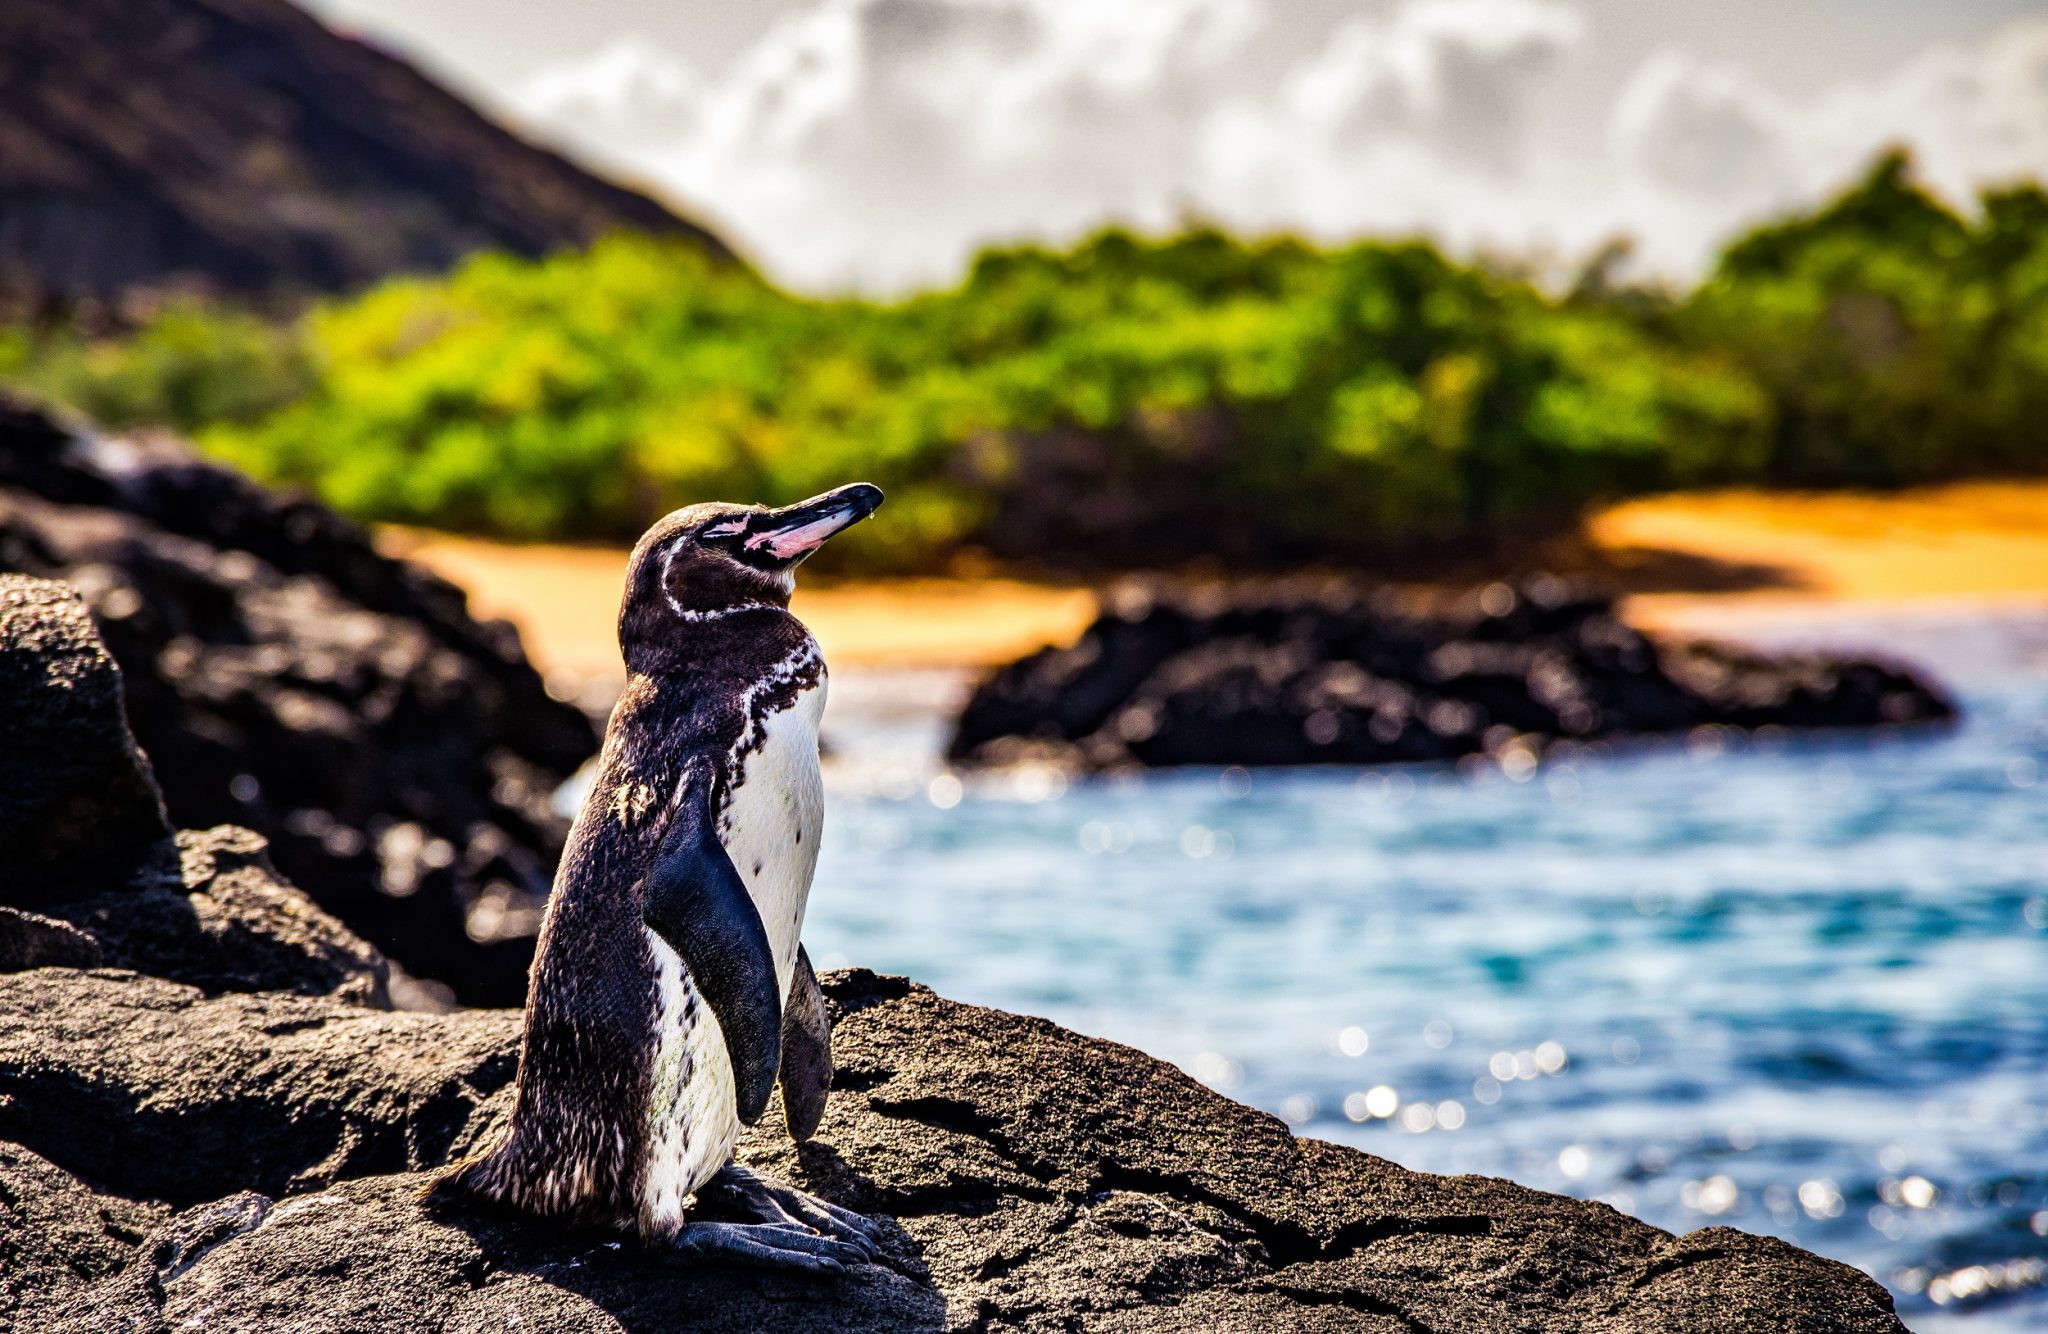 A Galapagos penguin sitting on a rock, just one of many endemic and pelagic species you can see while Galapagos diving